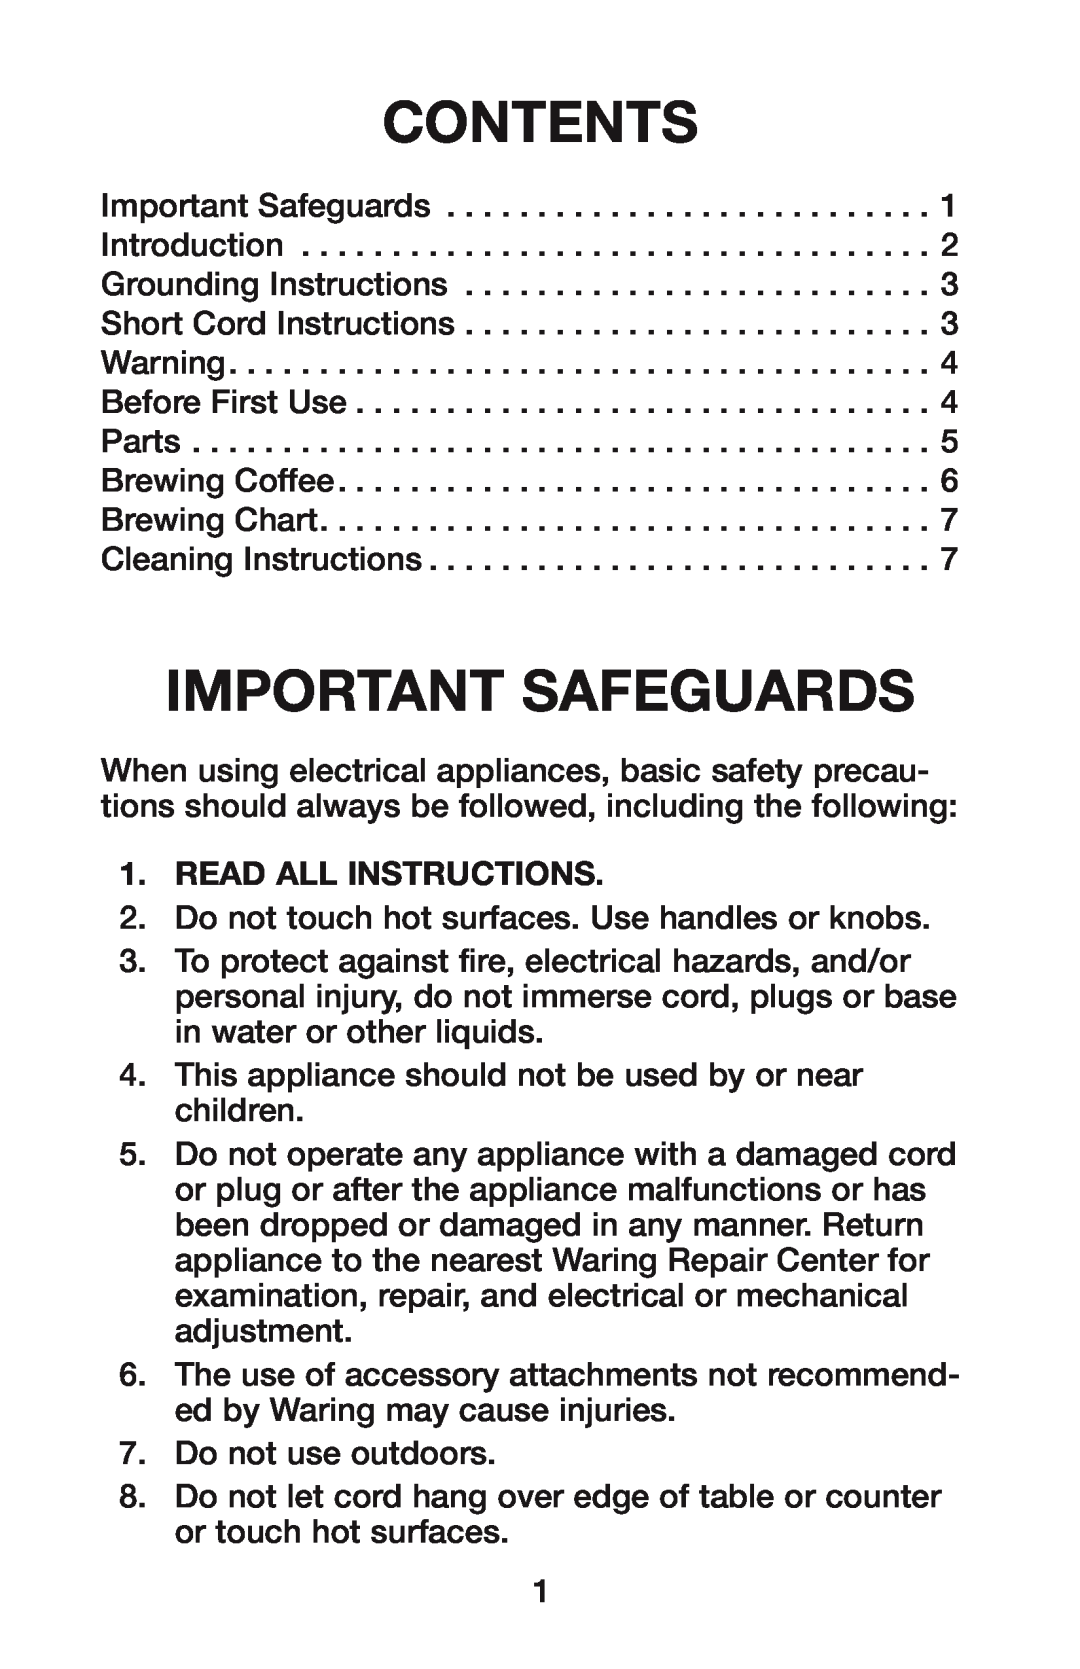 Waring CU-55 manual Contents, Important Safeguards, Read All Instructions 